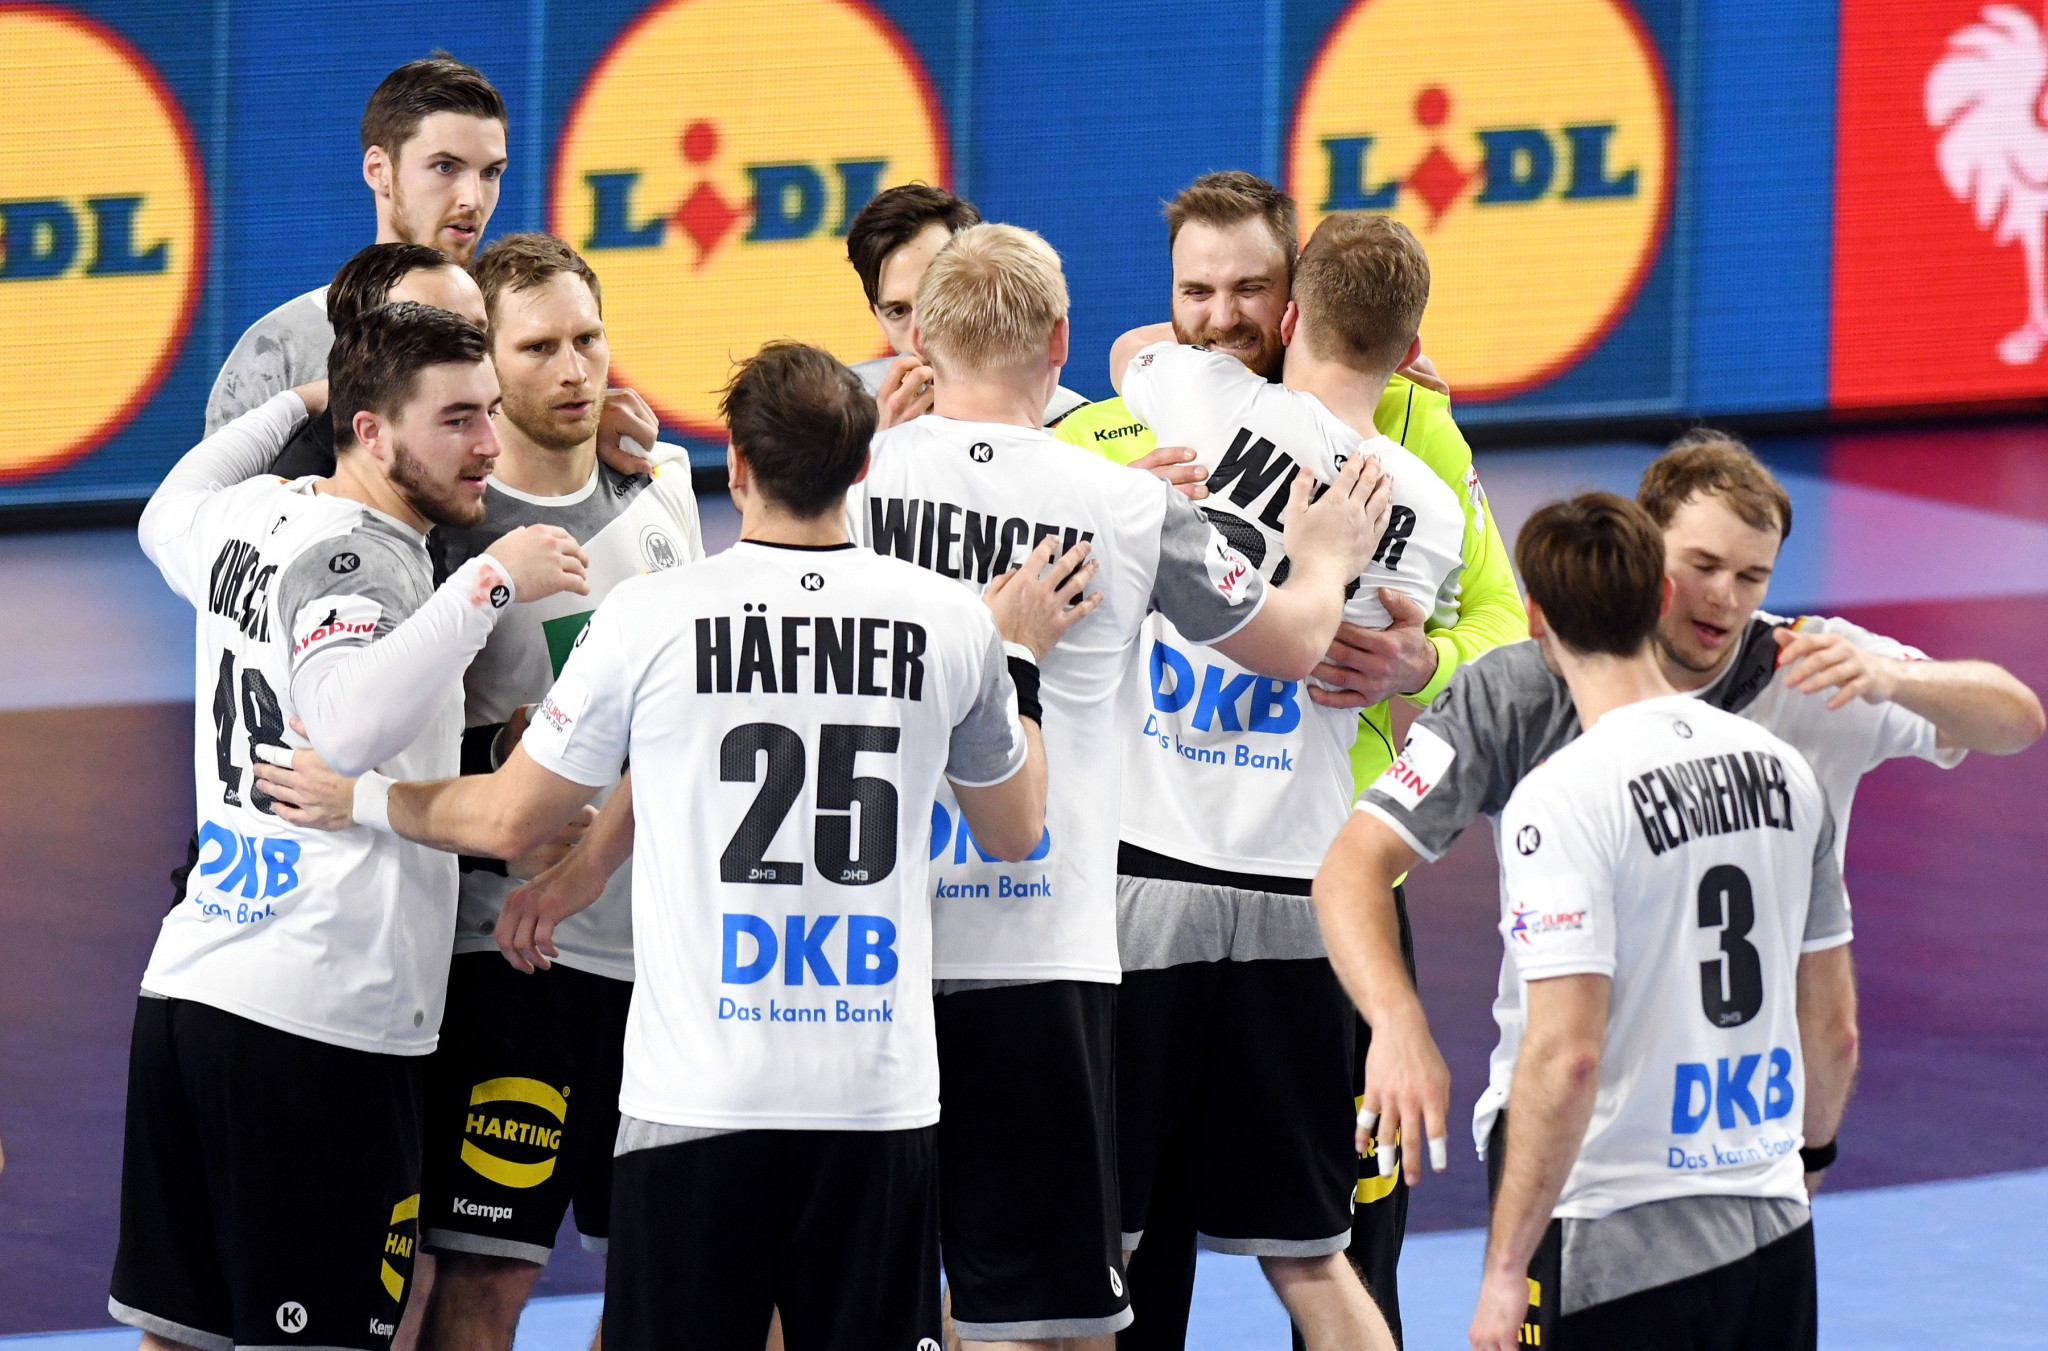 Germany are hoping to win their third European Men's Handball championship title in Croatia ©Getty Images